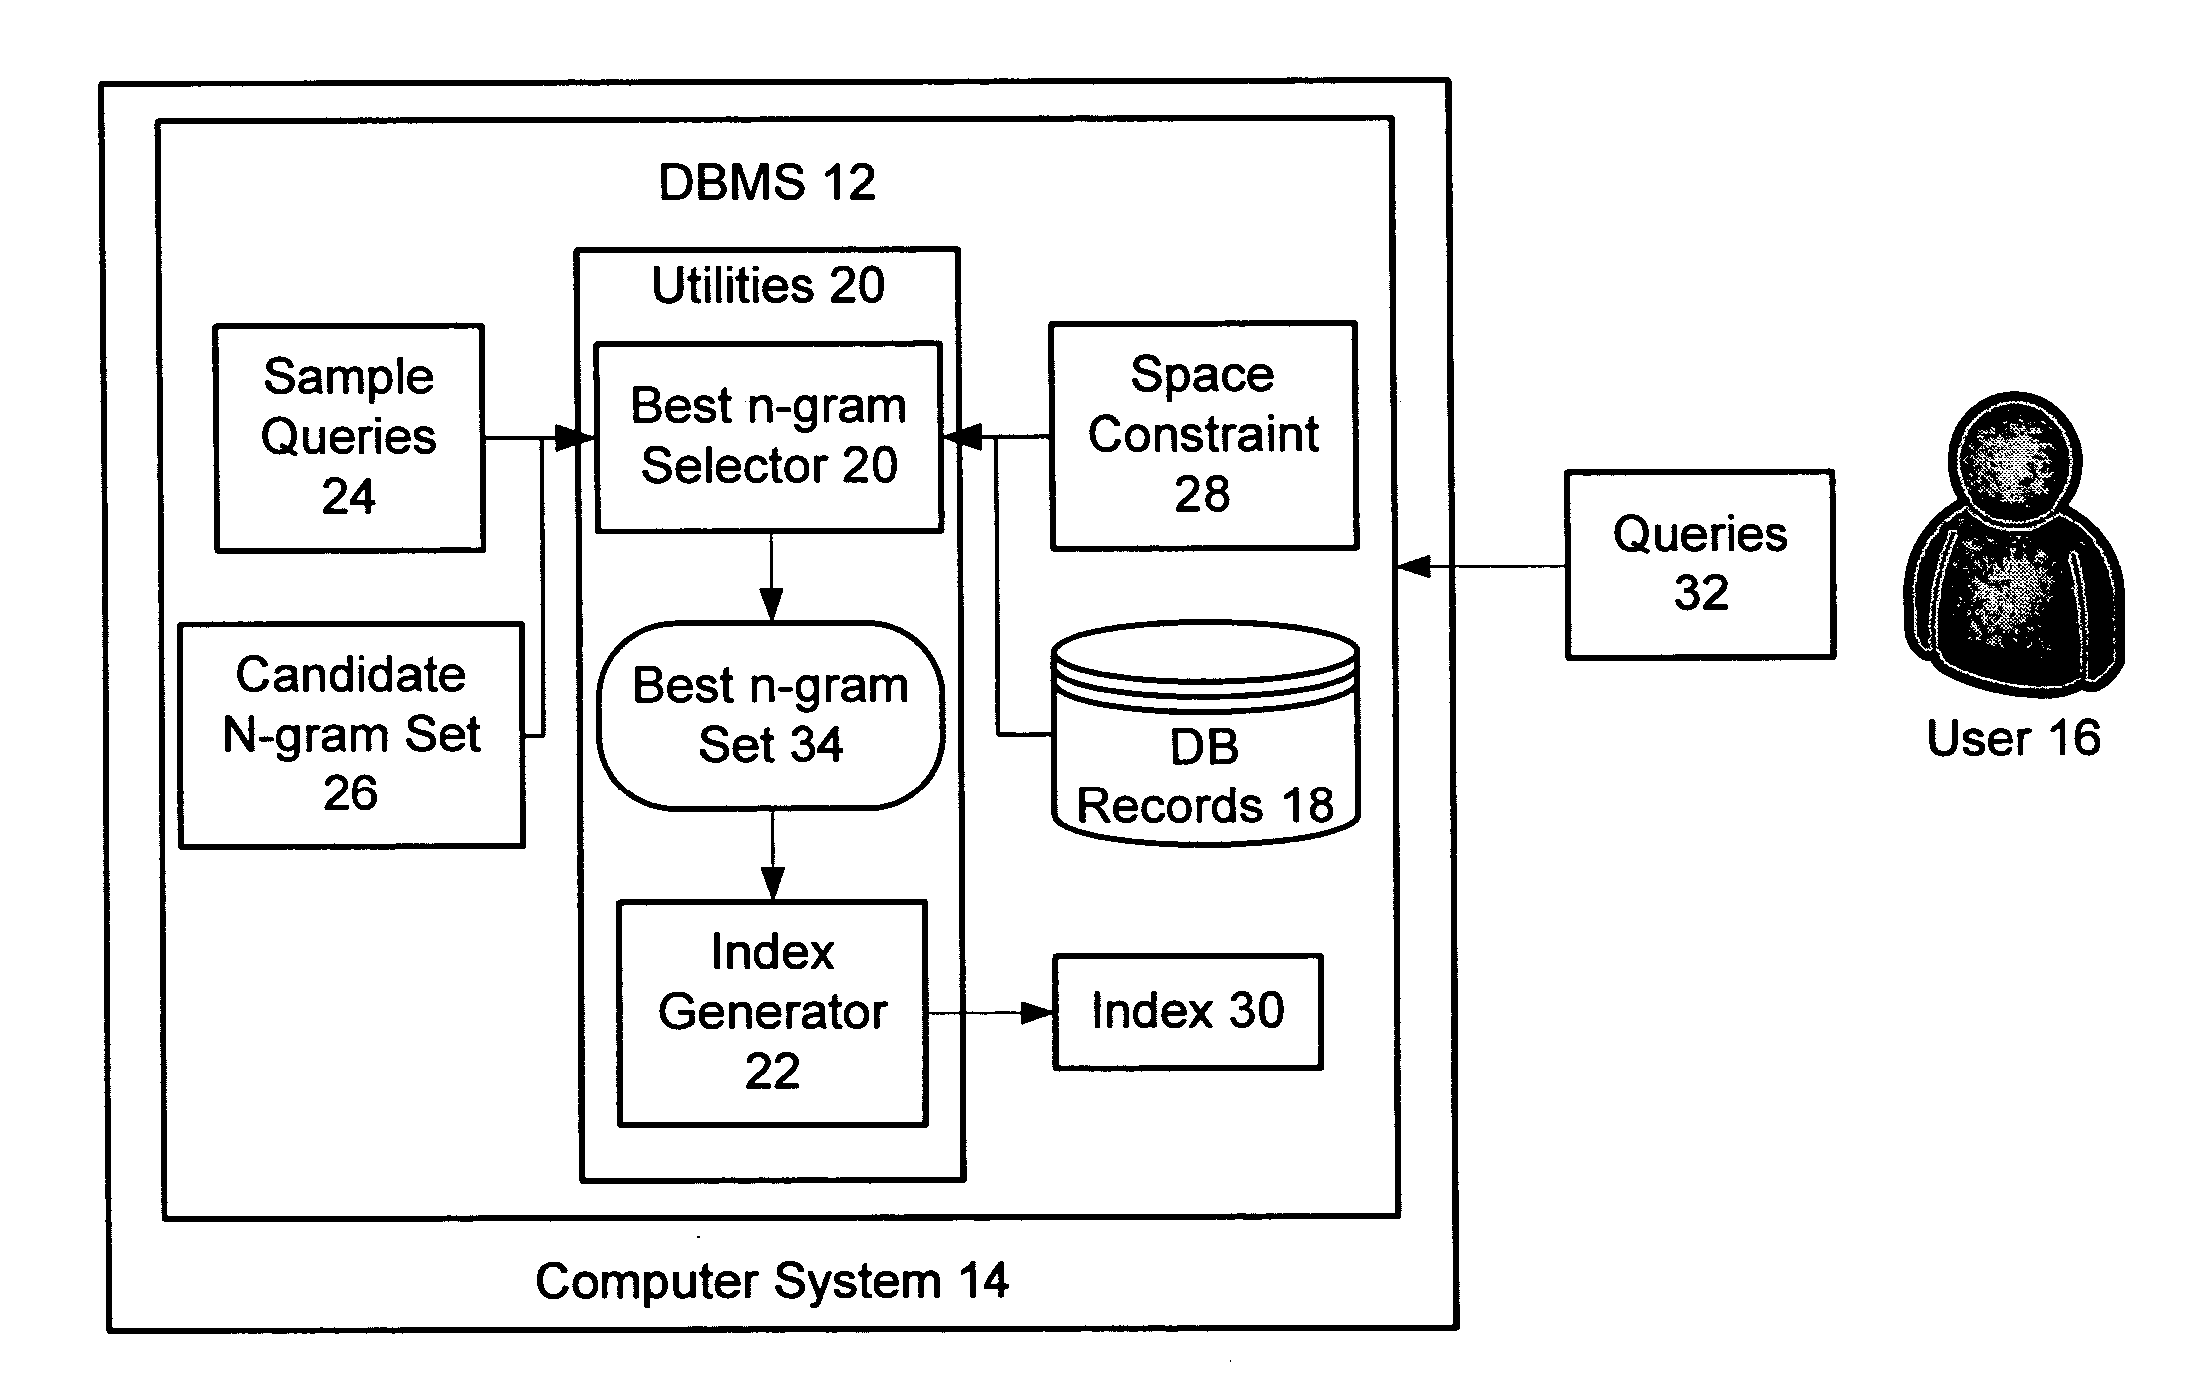 Selection of a set of optimal n-grams for indexing string data in a DBMS system under space constraints introduced by the system